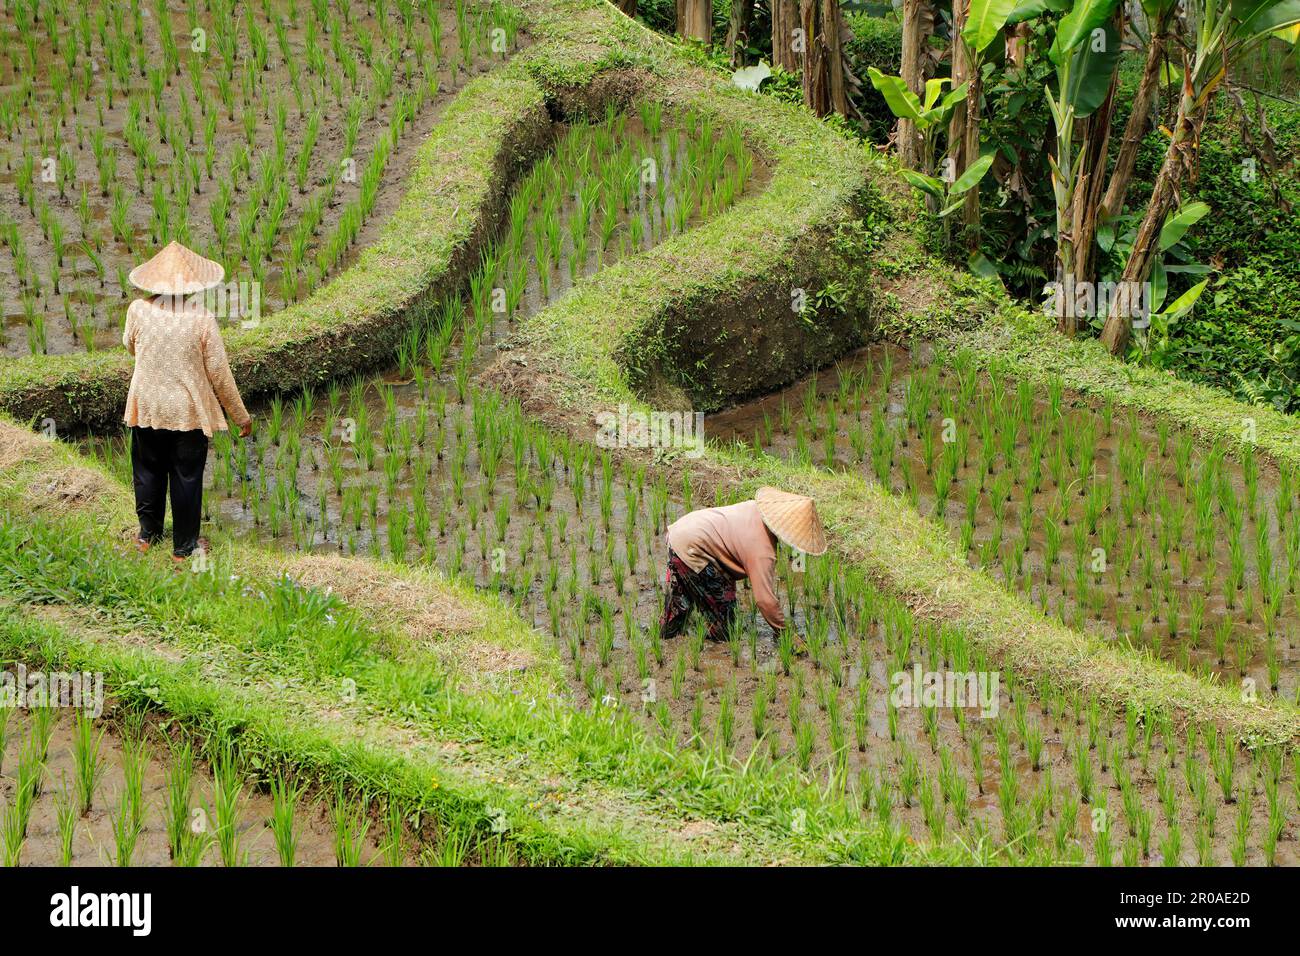 Ubud, Bali, Indonesia - September 7, 2019: An unidentified woman working in a rice paddy of the lush green Tegallalang rice terraces Stock Photo